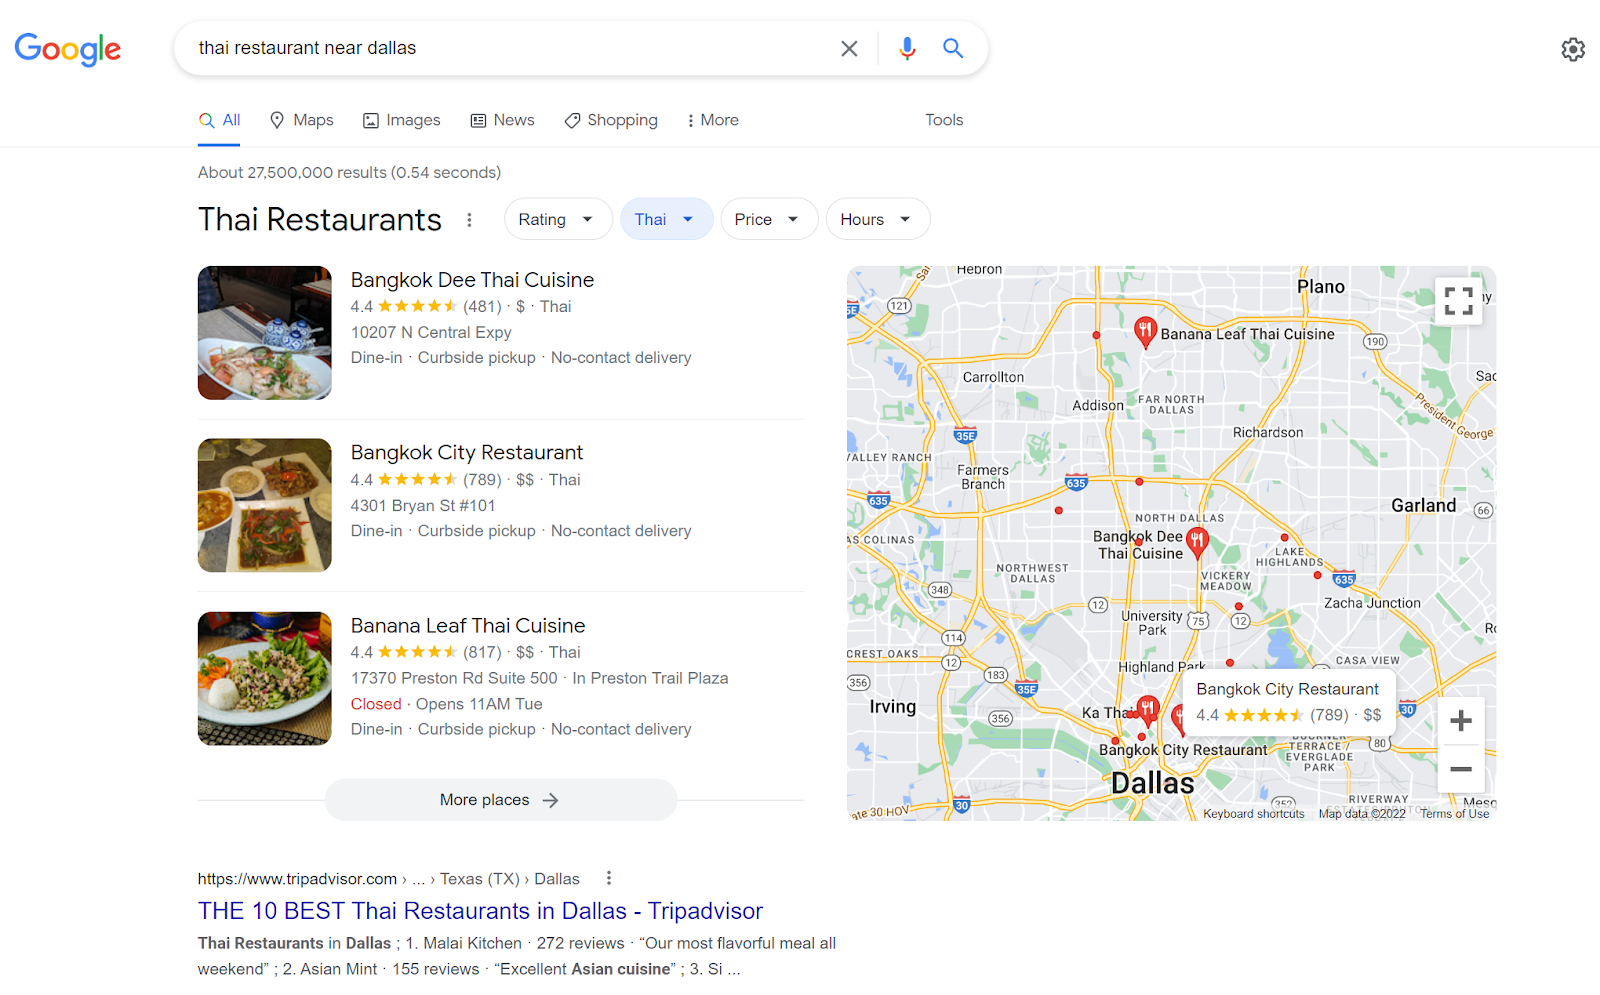 "Thai restaurant near Dallas" on local search with the map